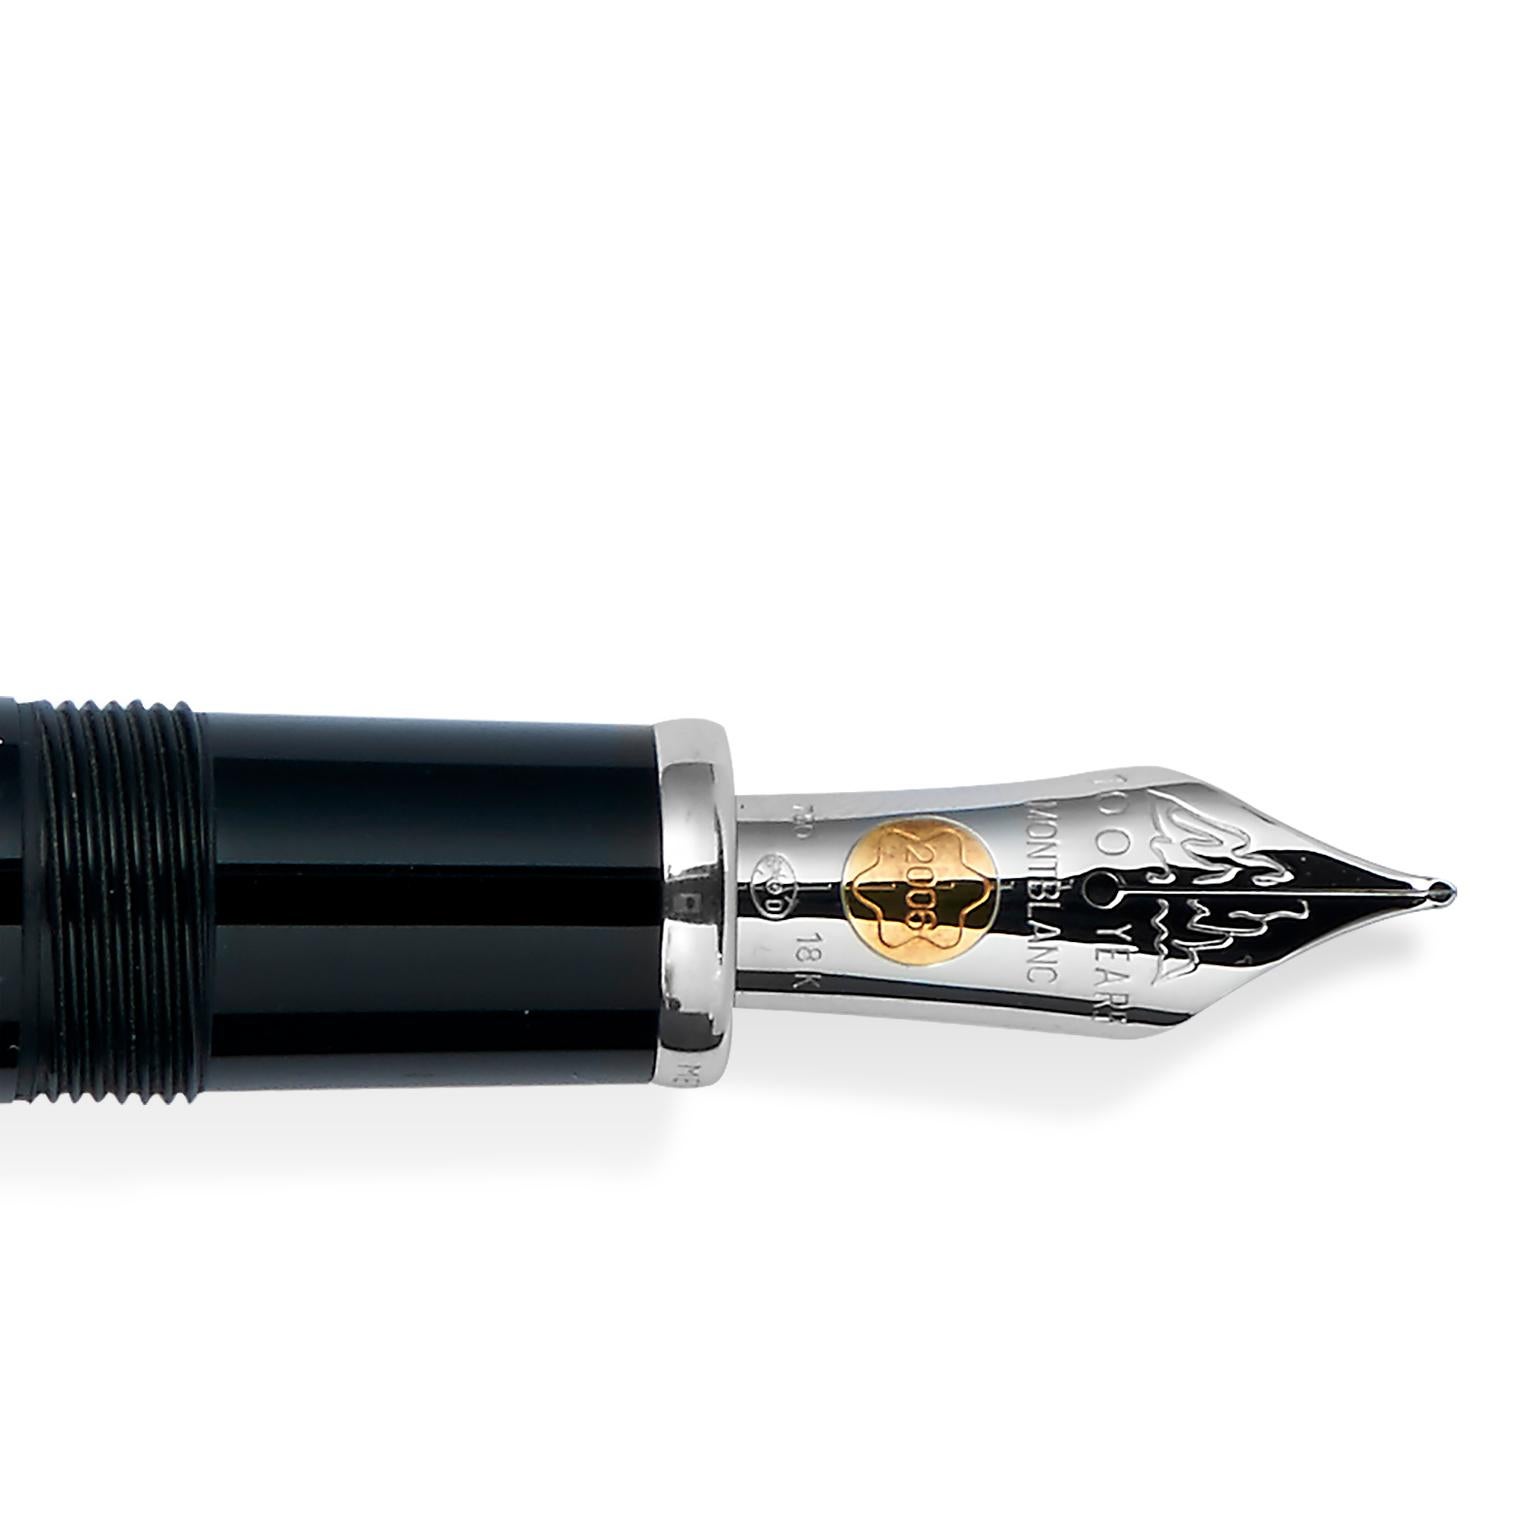 This limited edition fountain pen was released in 2006 to celebrate Montblanc's 100th anniversary. It features a smooth sterling silver barrel with a granite cap. The cap top is set with a large top Wesselton diamond cut in the shape of the